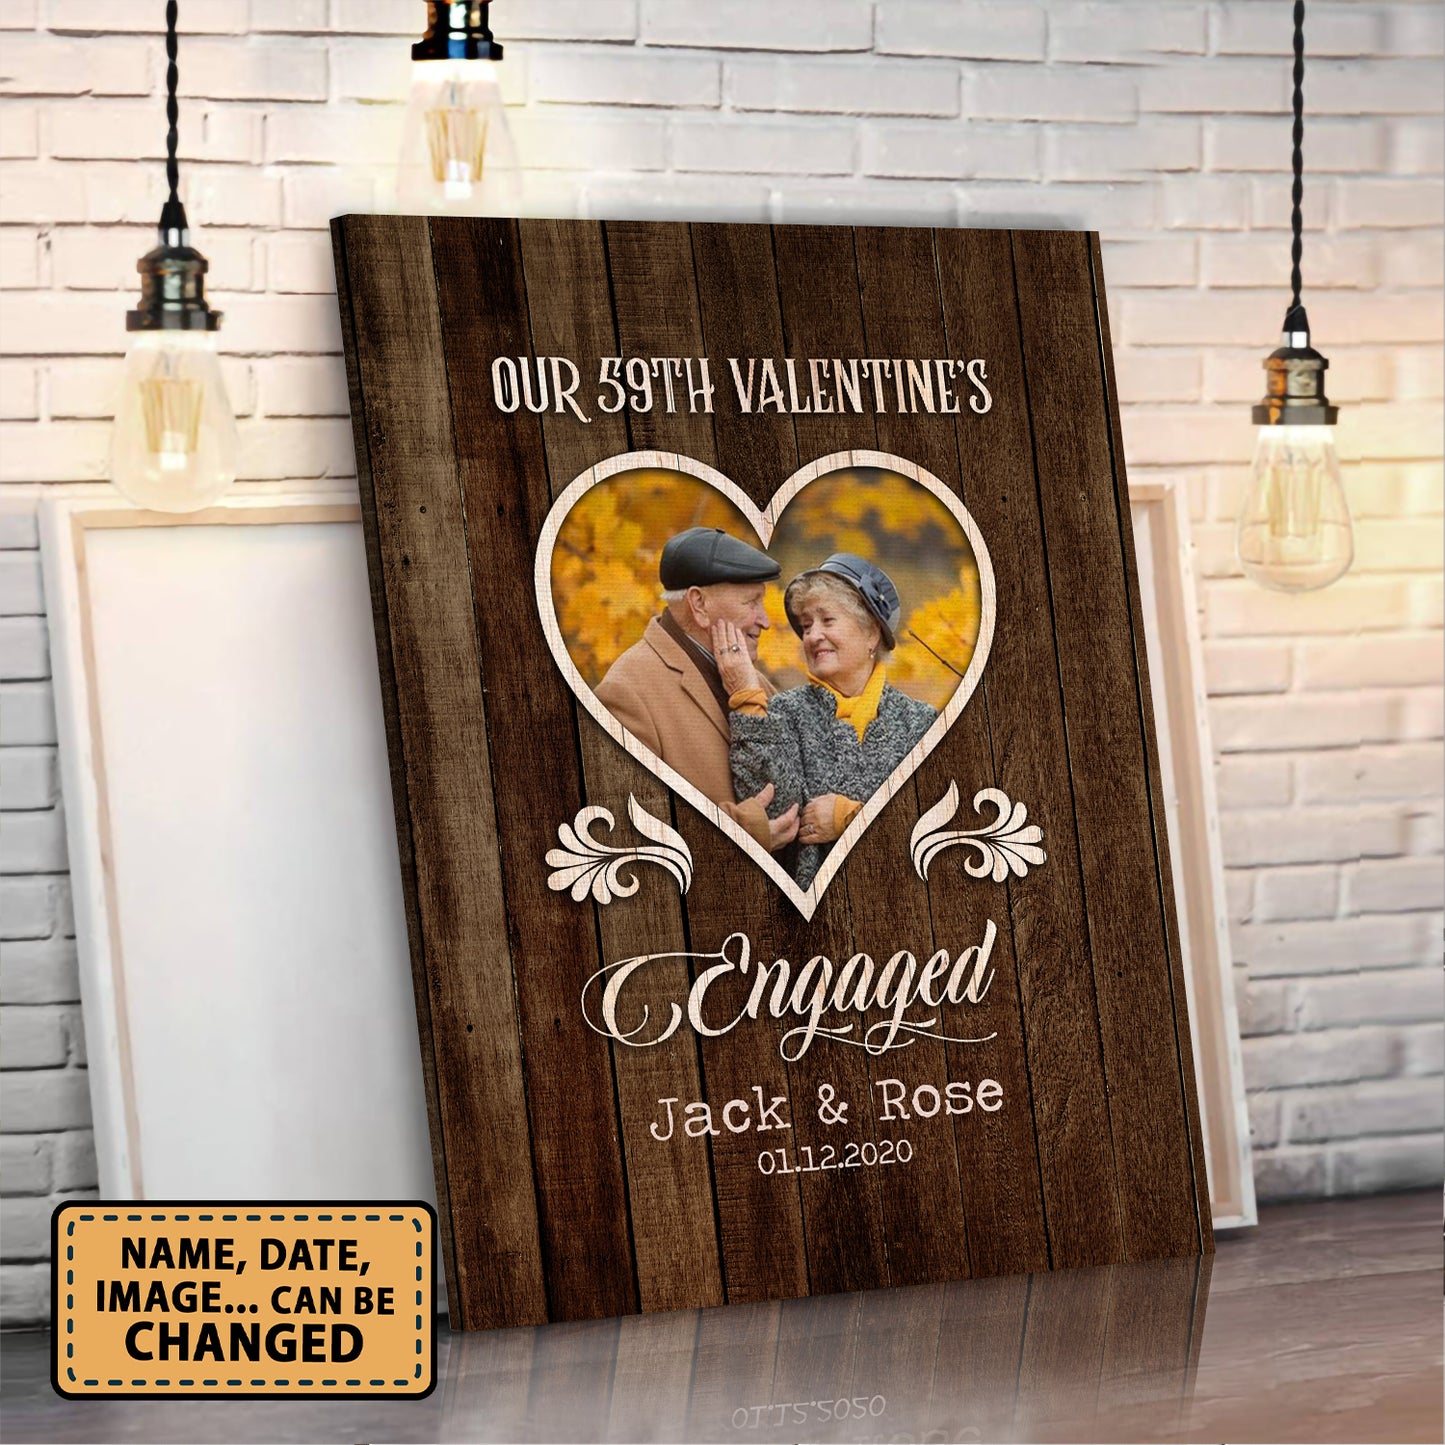 Our 59th Valentine’s Day Engaged Custom Image Anniversary Canvas